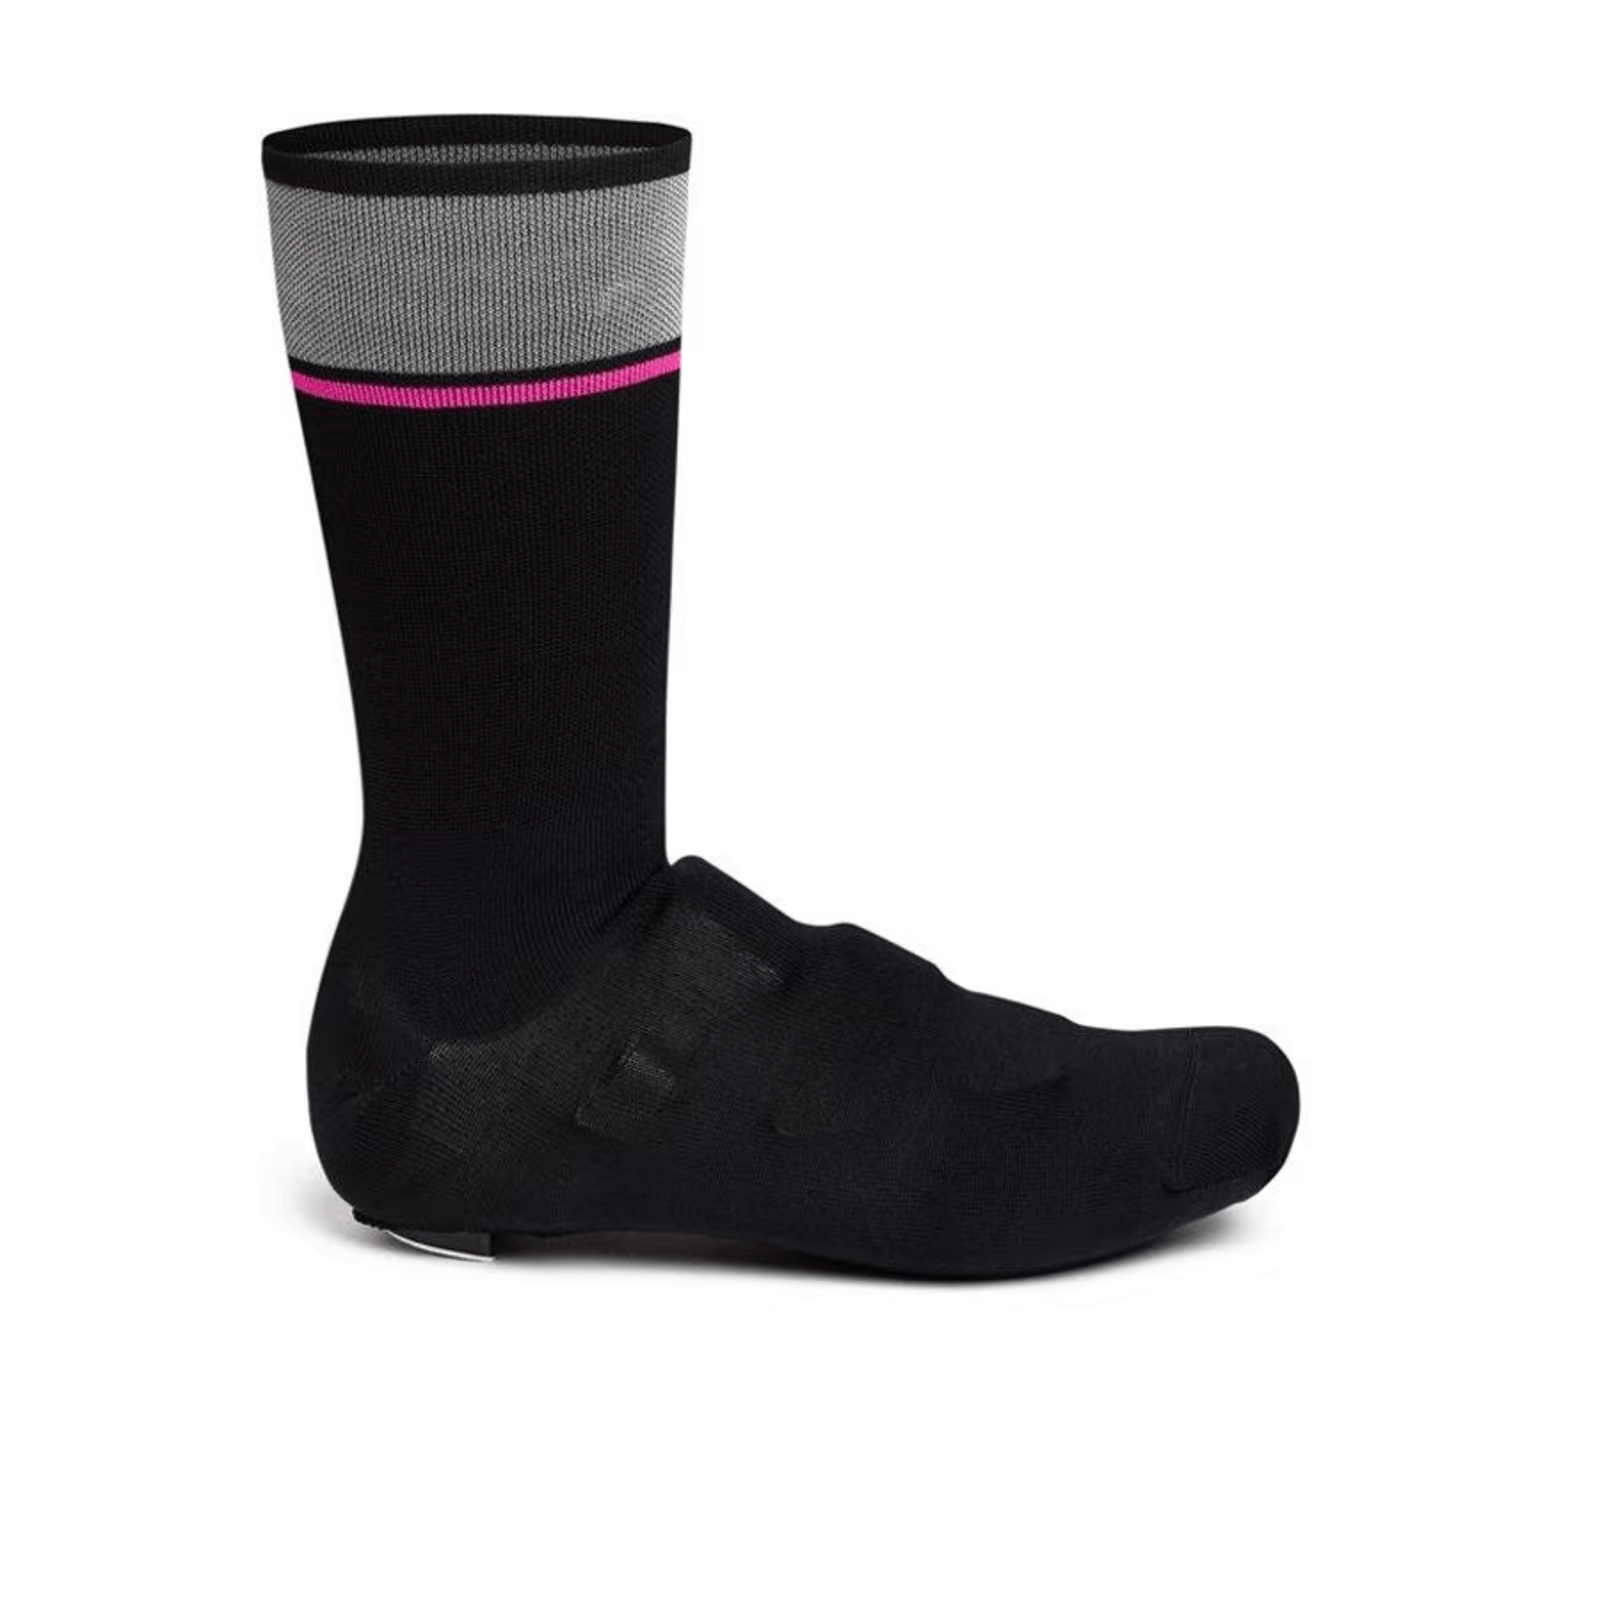 Rapha Reflective Oversocks Black / M Apparel - Apparel Accessories - Shoe Covers